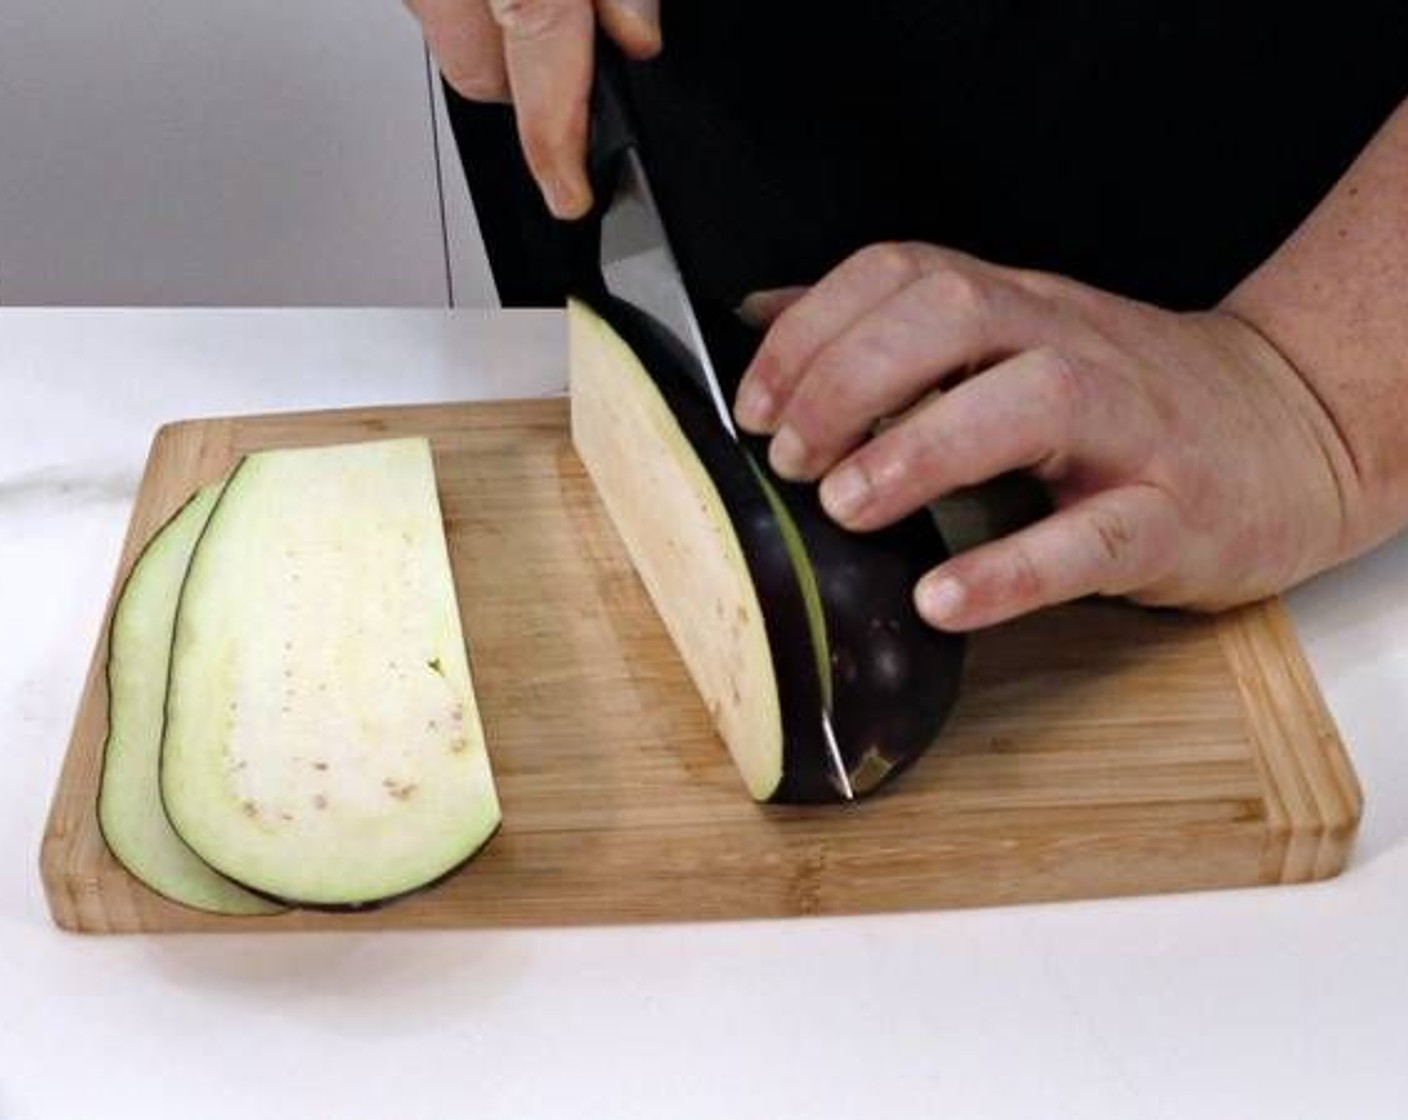 step 1 Start by cutting the Eggplant (1) vertically in 1-centimeter slices.